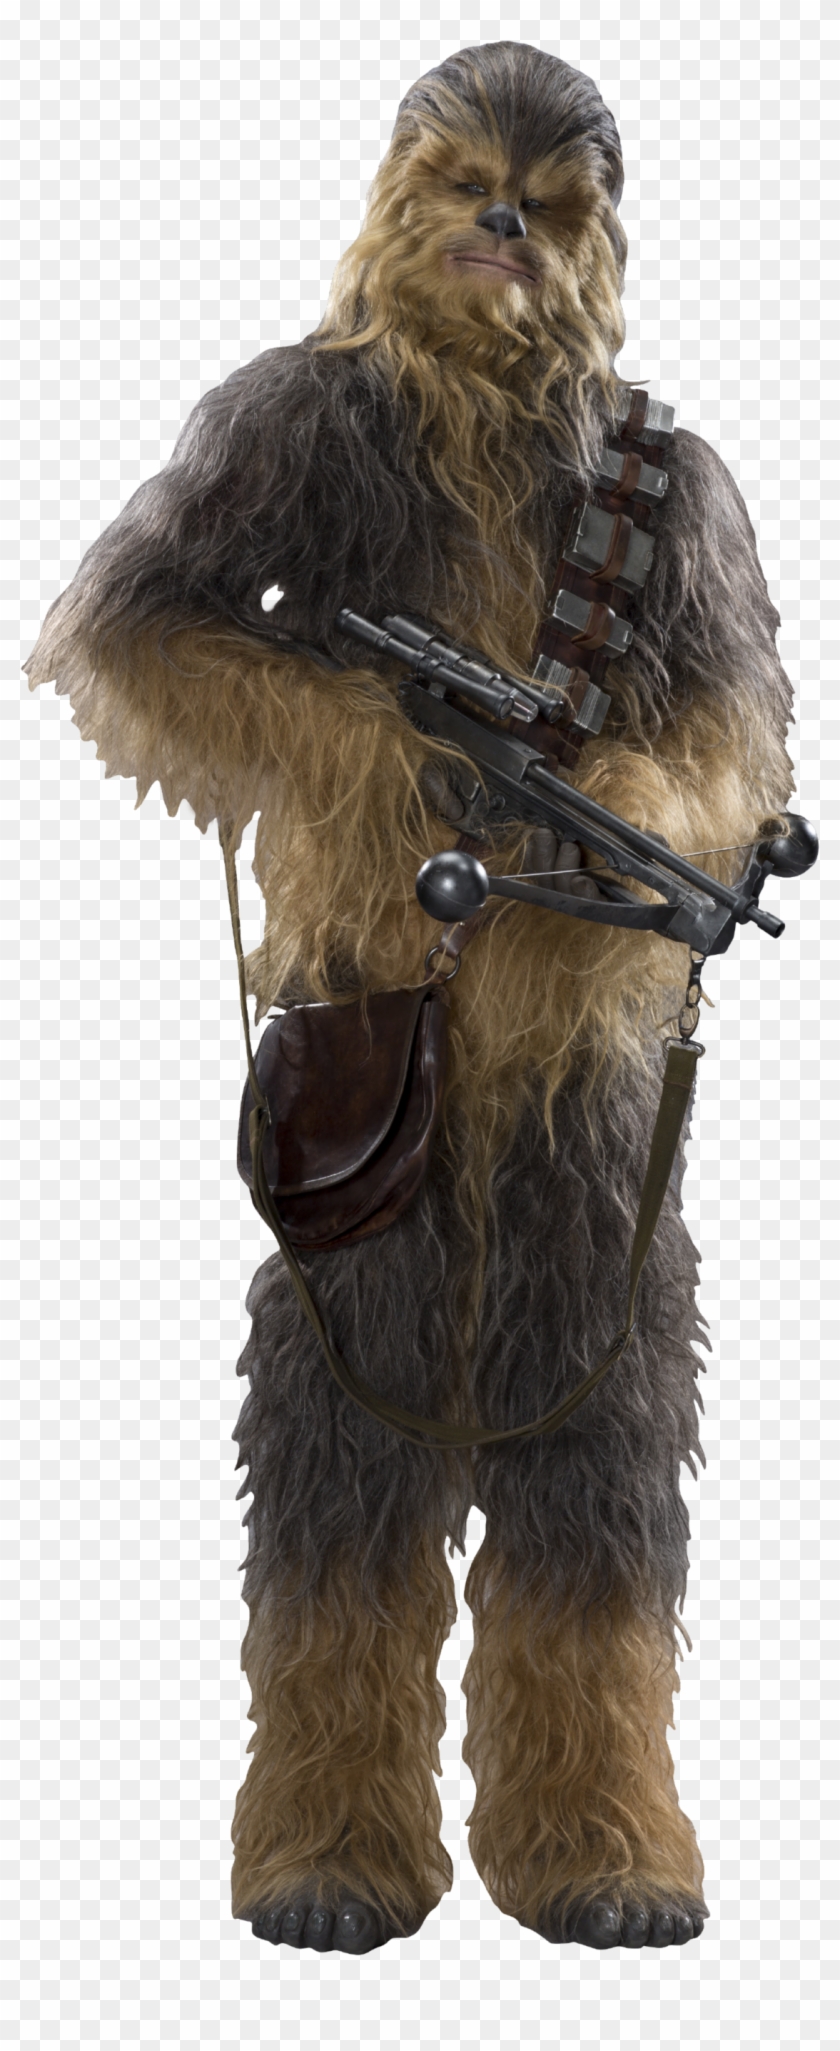 Chewbacca Star Wars Characters No Background HD Png